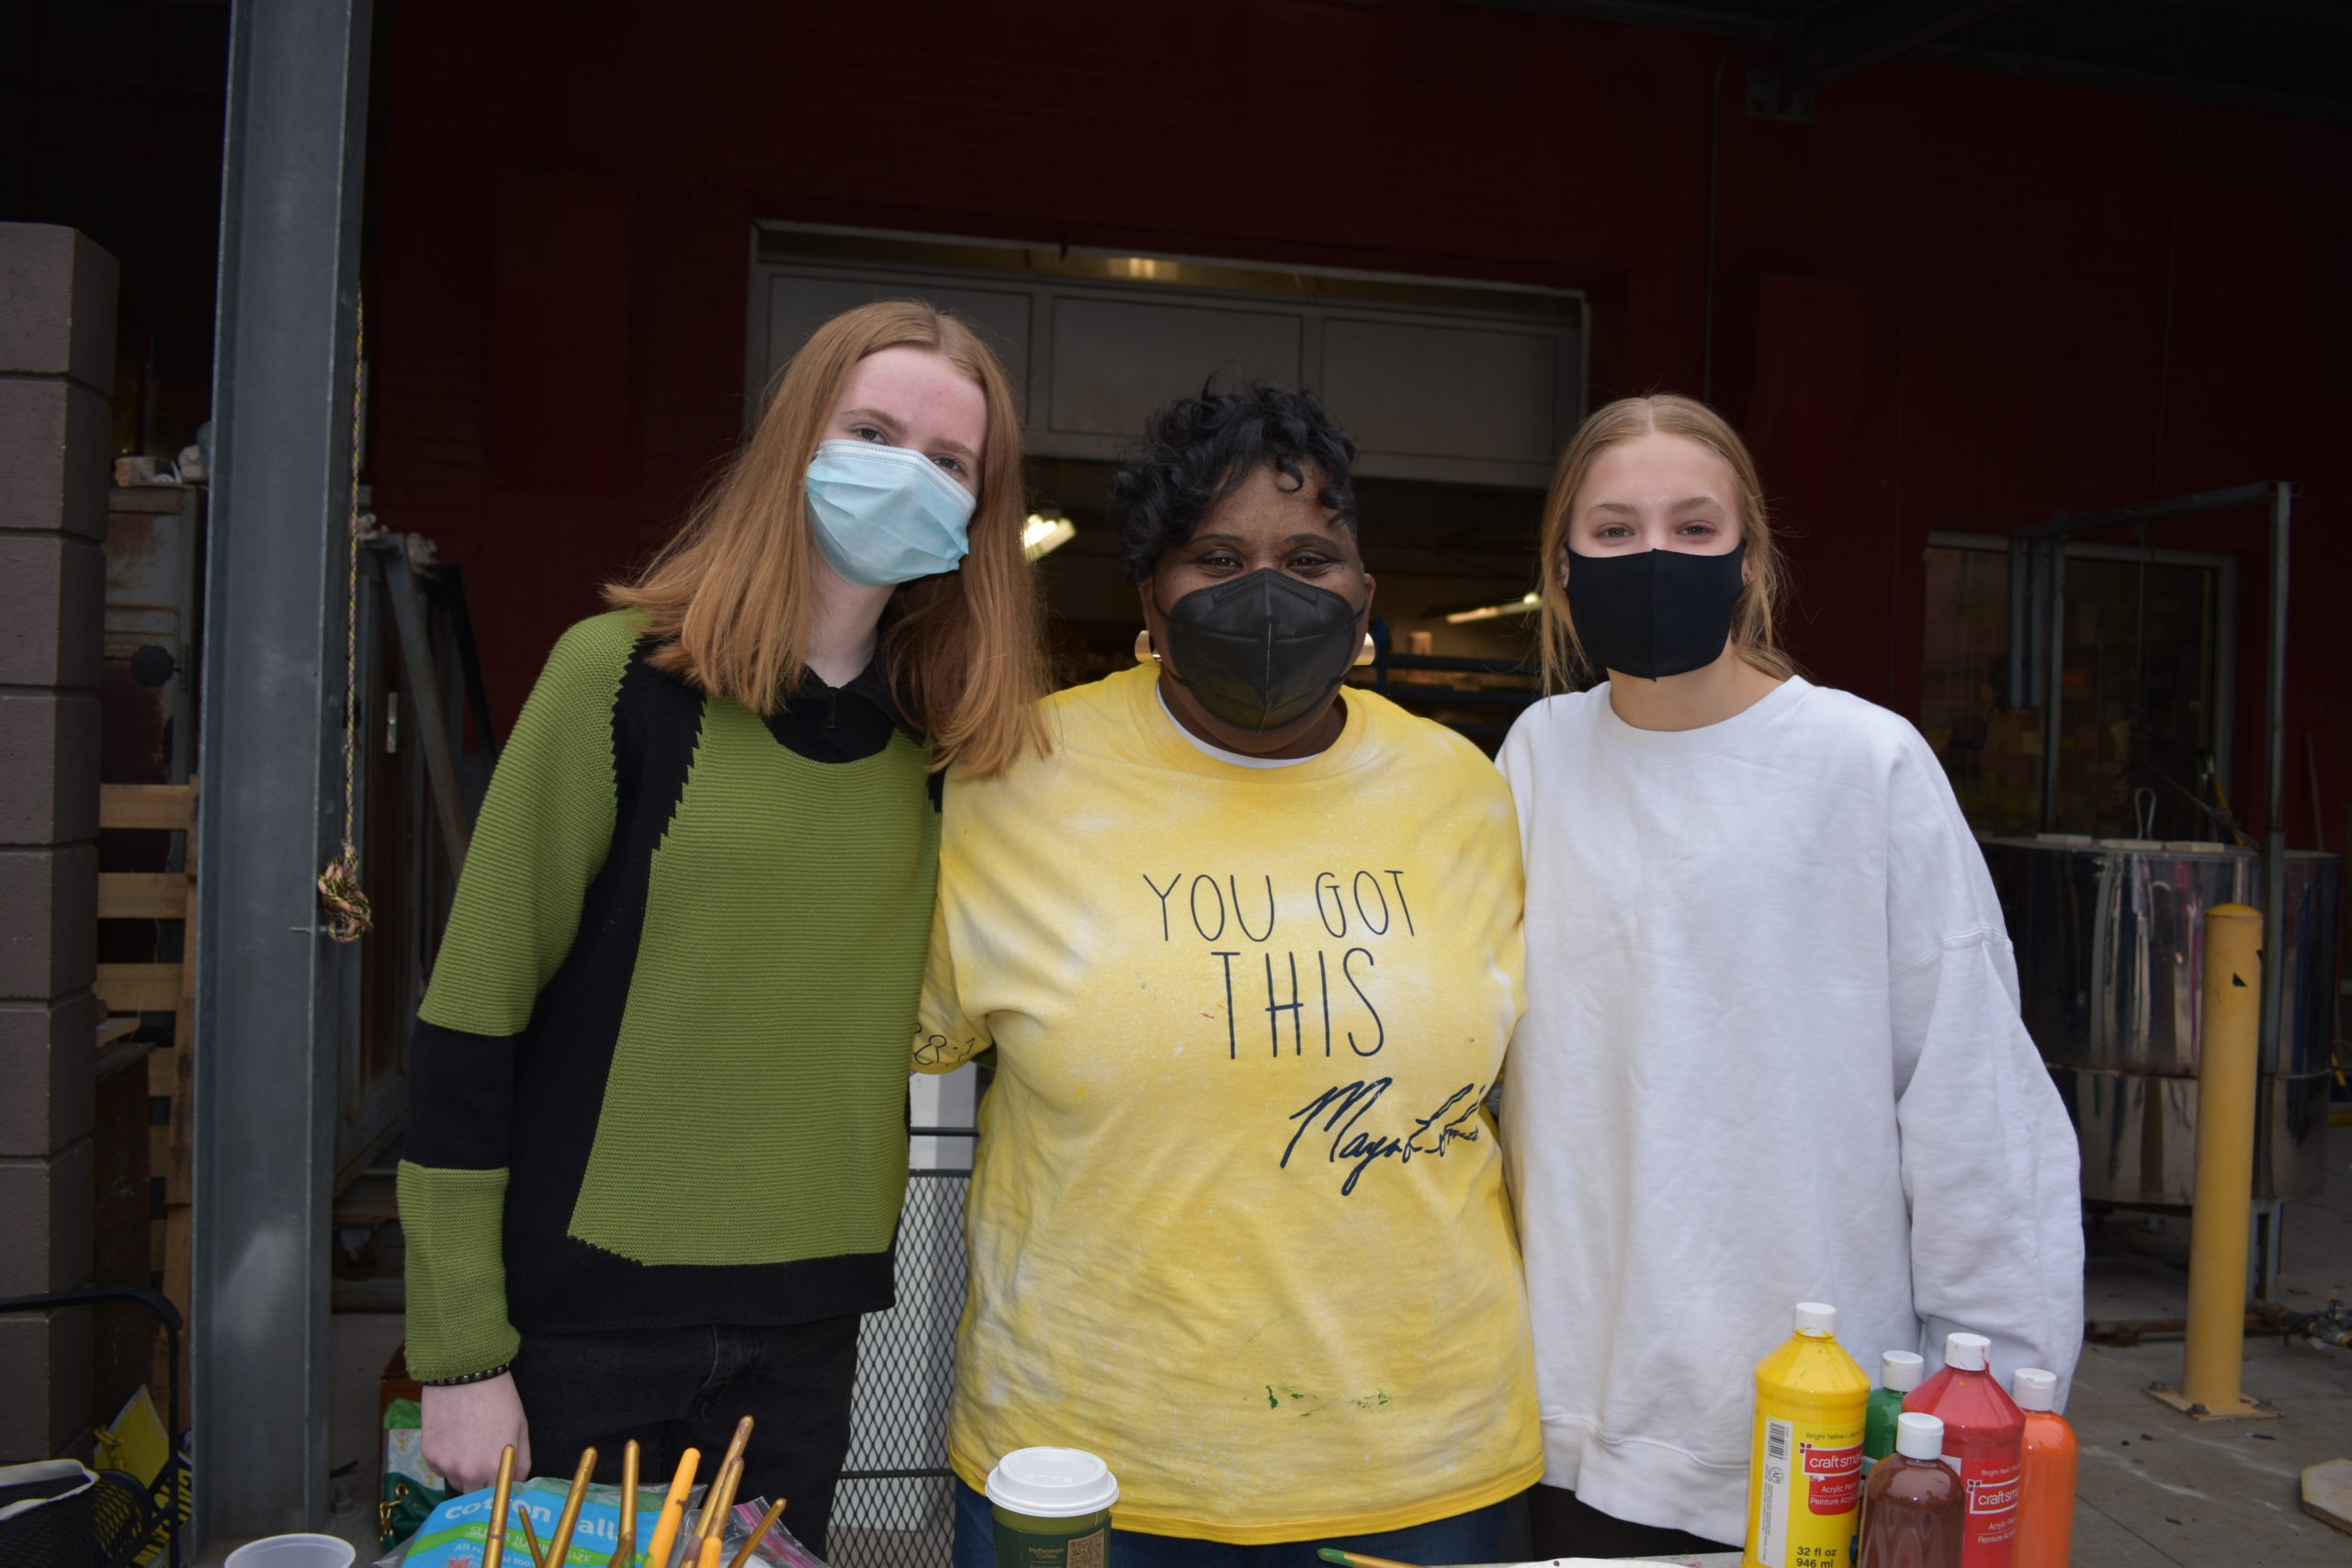 A woman and two teenagers wearing cloth masks and standing together